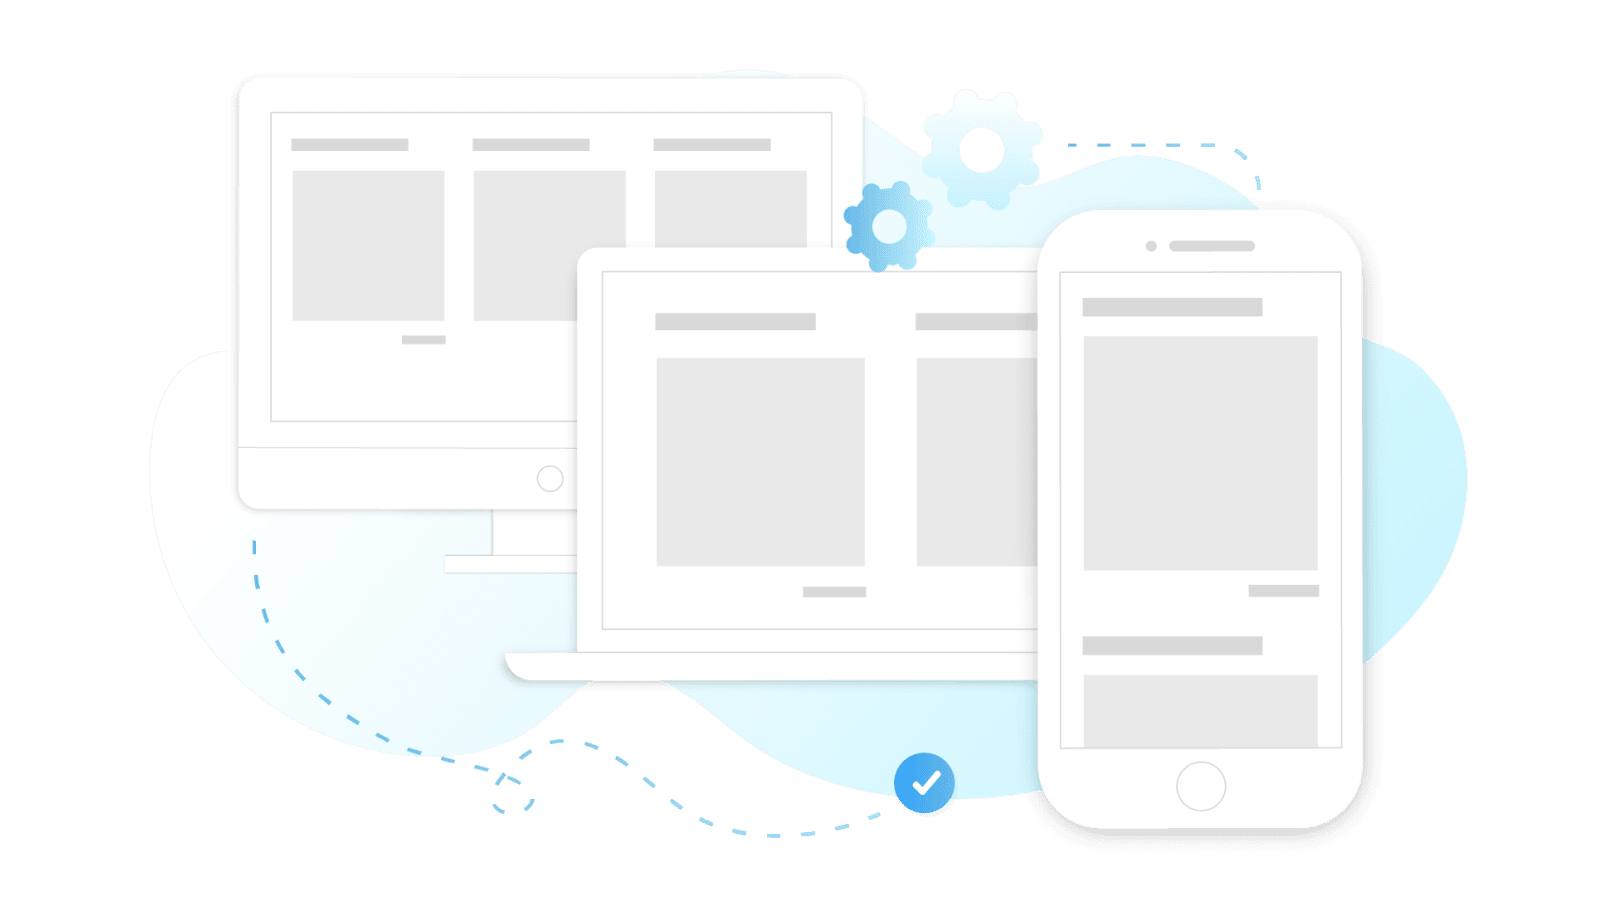 Responsive design for internal emails and employee newsletters